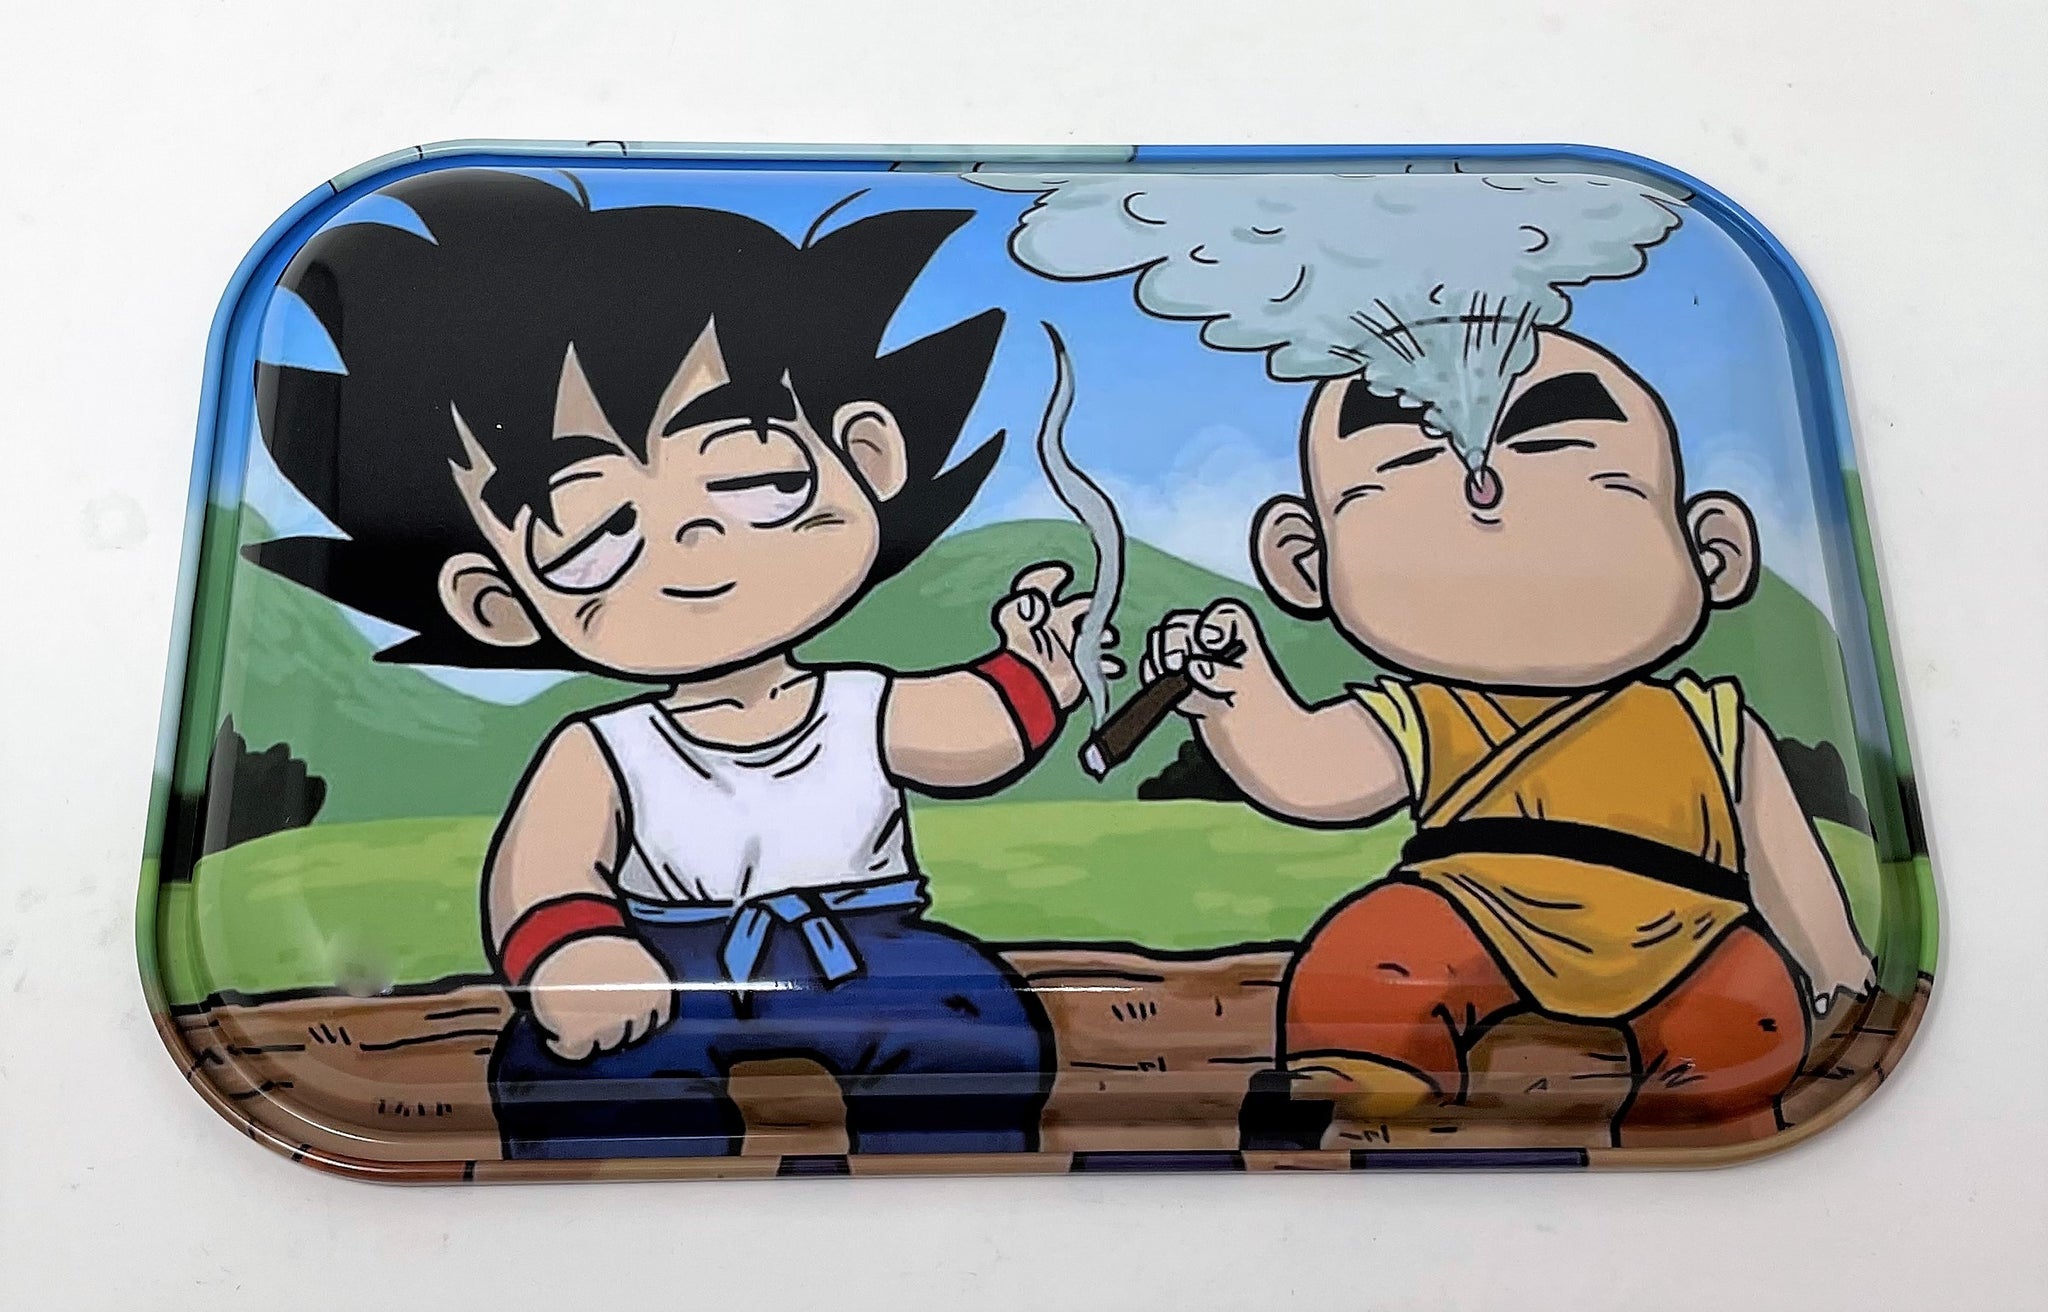 Dragon Ball Z Goku Characters Rolling Tray – My Rolling Tray